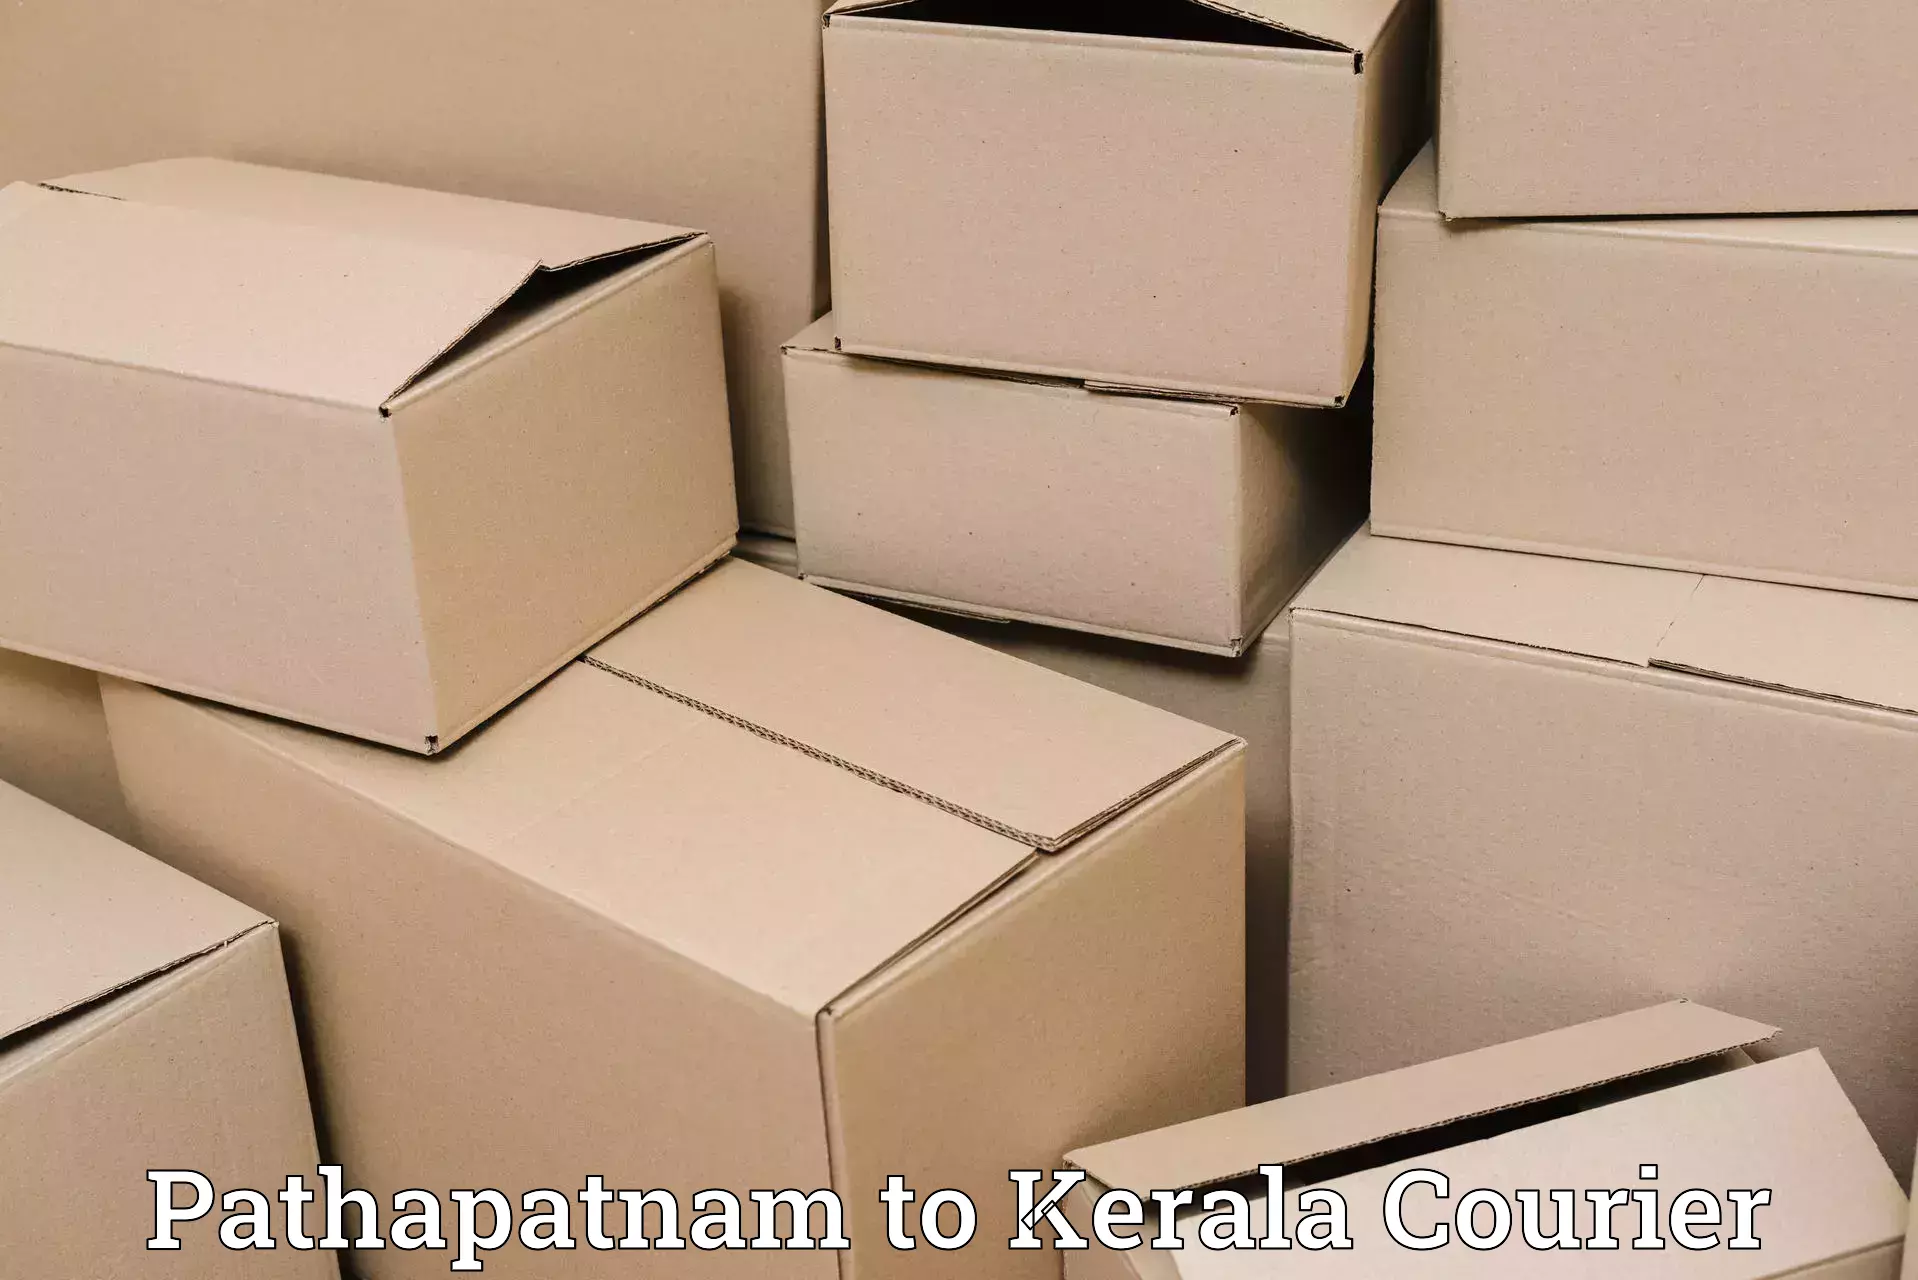 Multi-national courier services Pathapatnam to Kerala